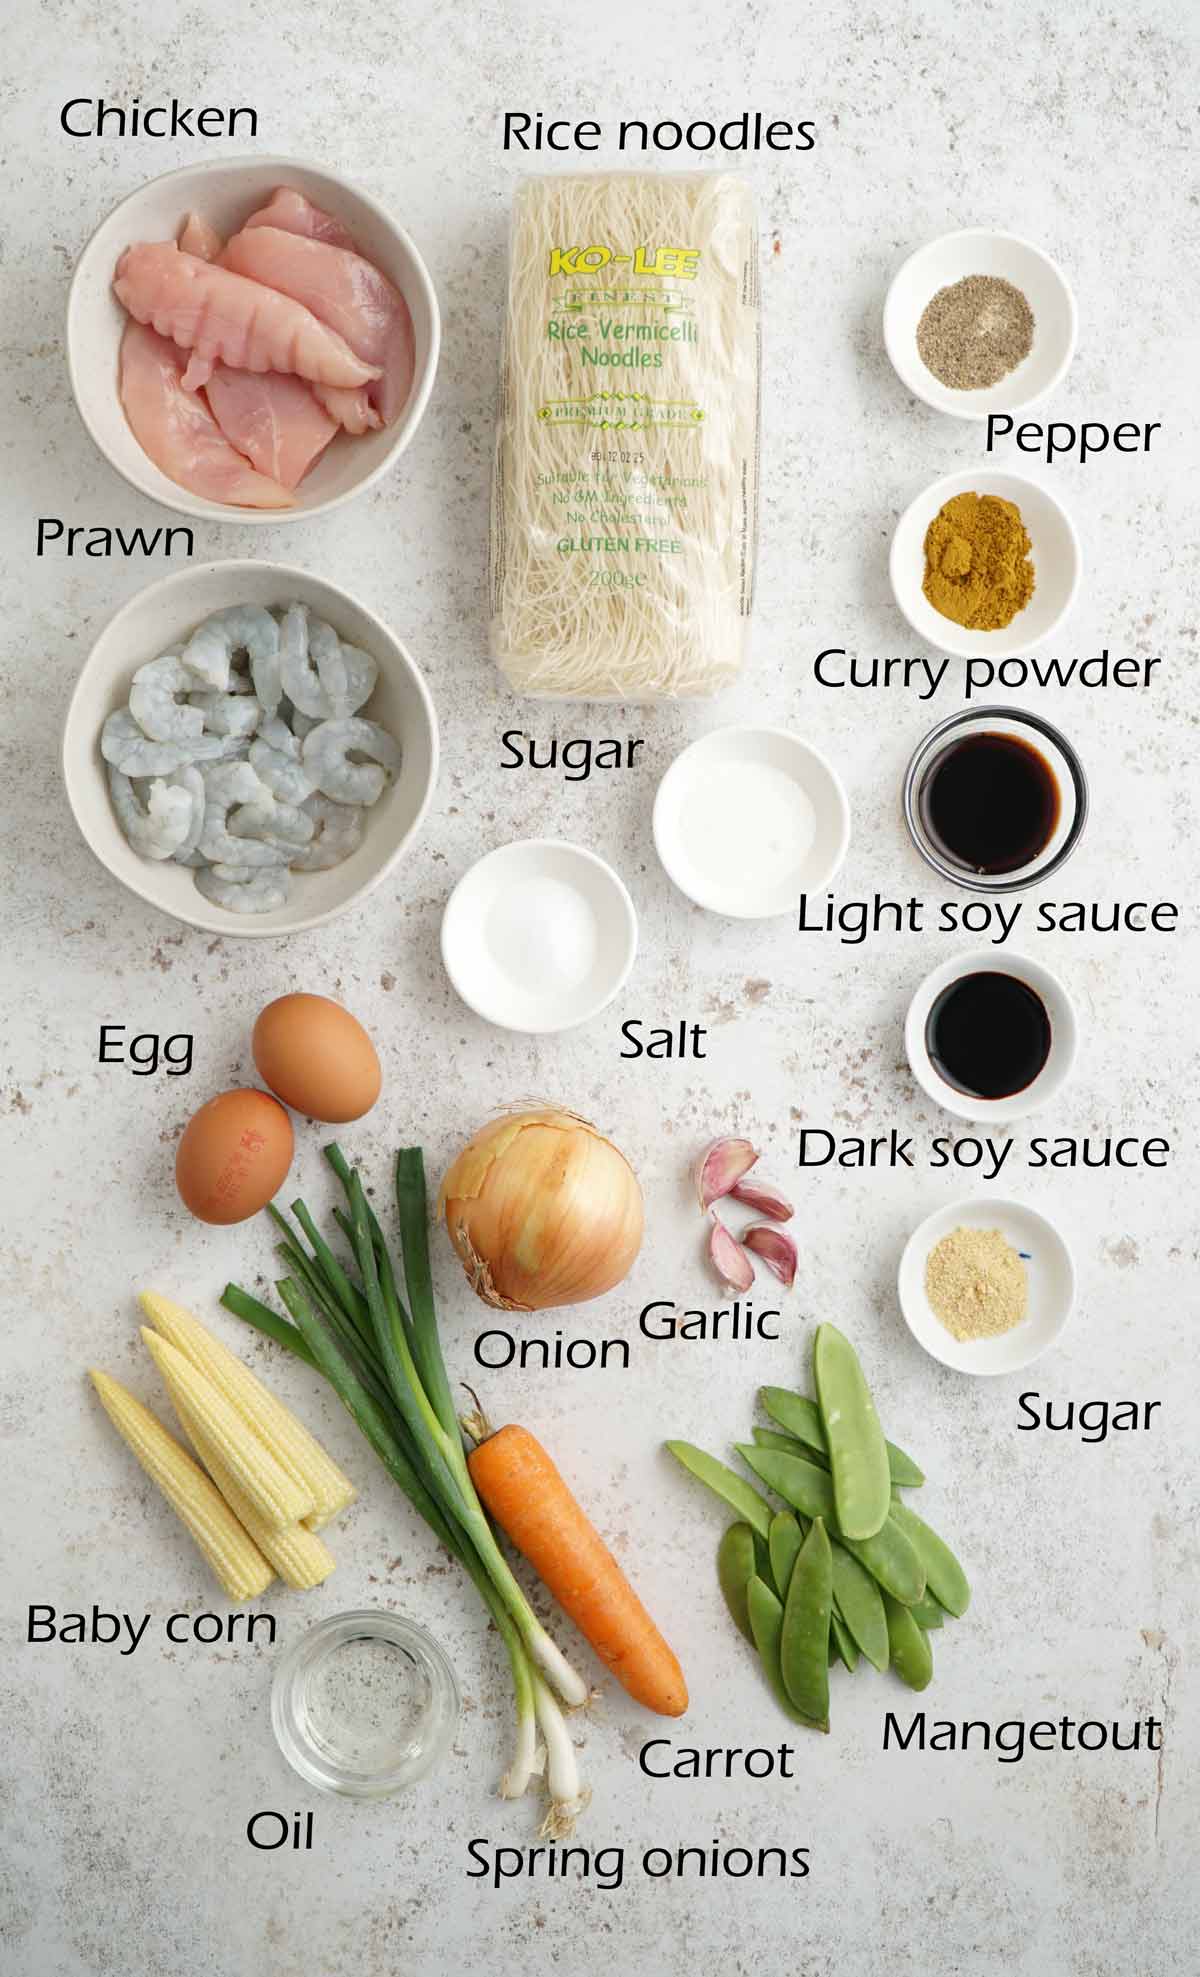 Labelled ingredients displayed on the white table.